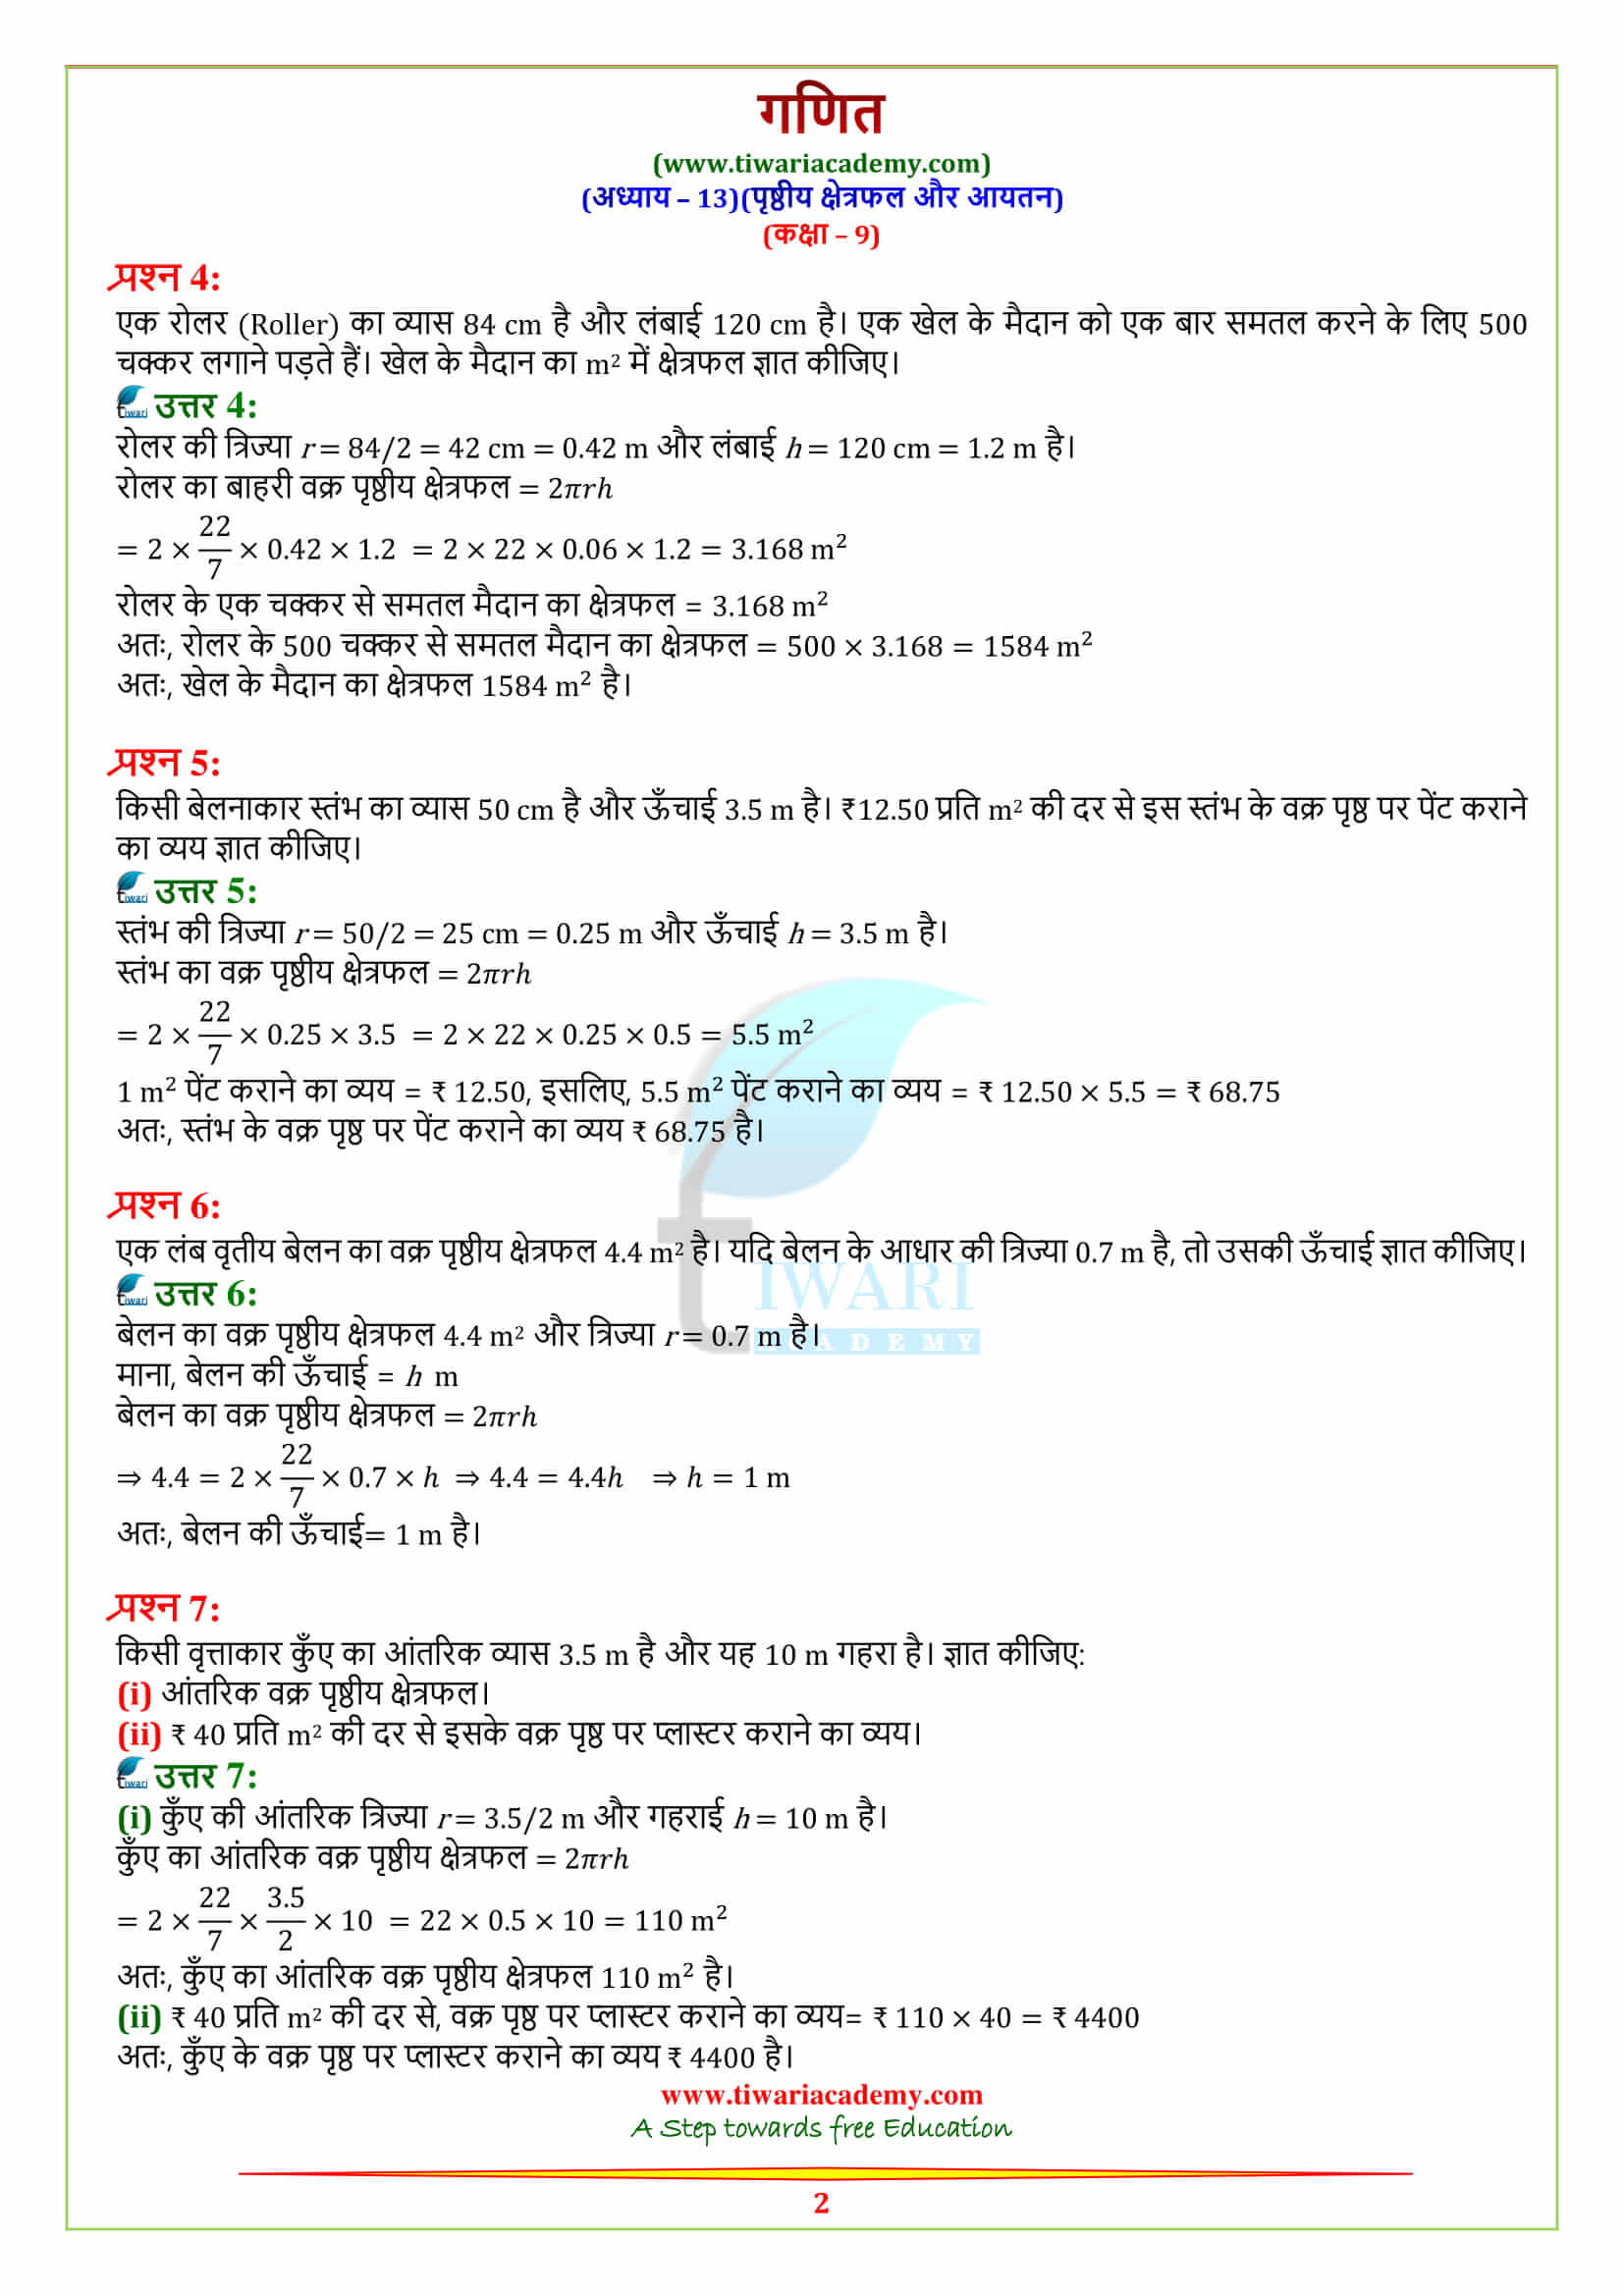 Class 9 Maths Chapter 13 Exercise 13.2 sols in hindi medium